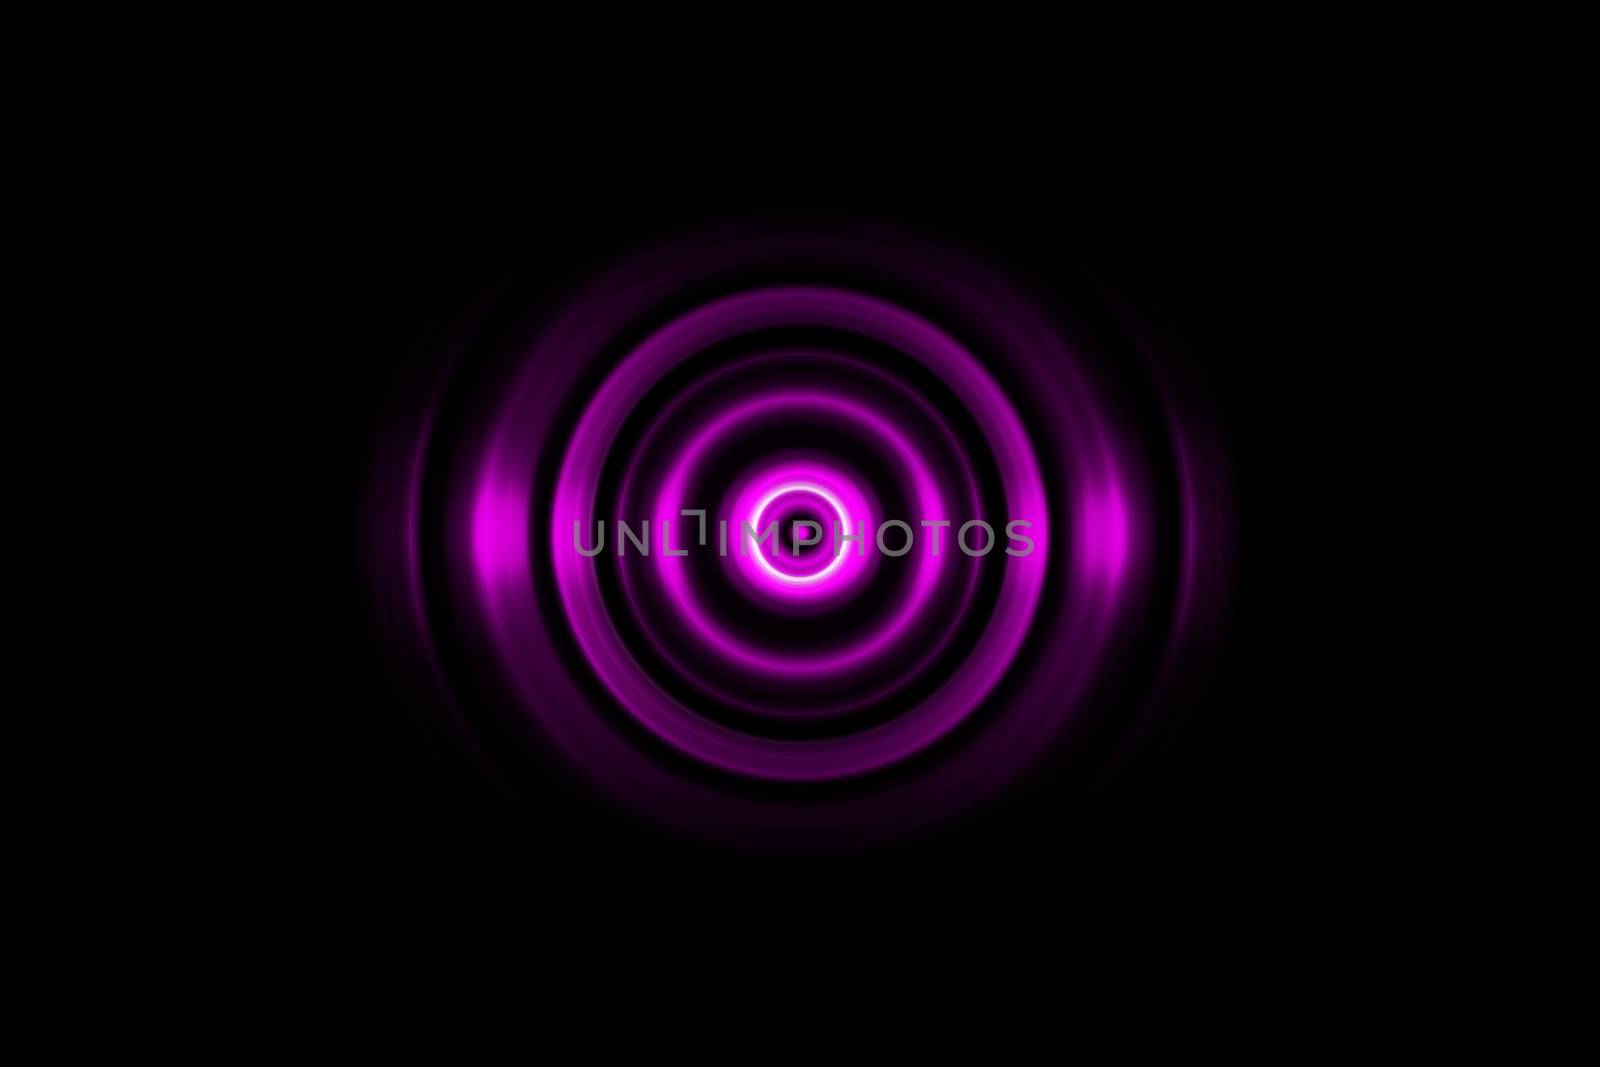 Dark purple ring with sound waves oscillating, abstract backgrou by mouu007